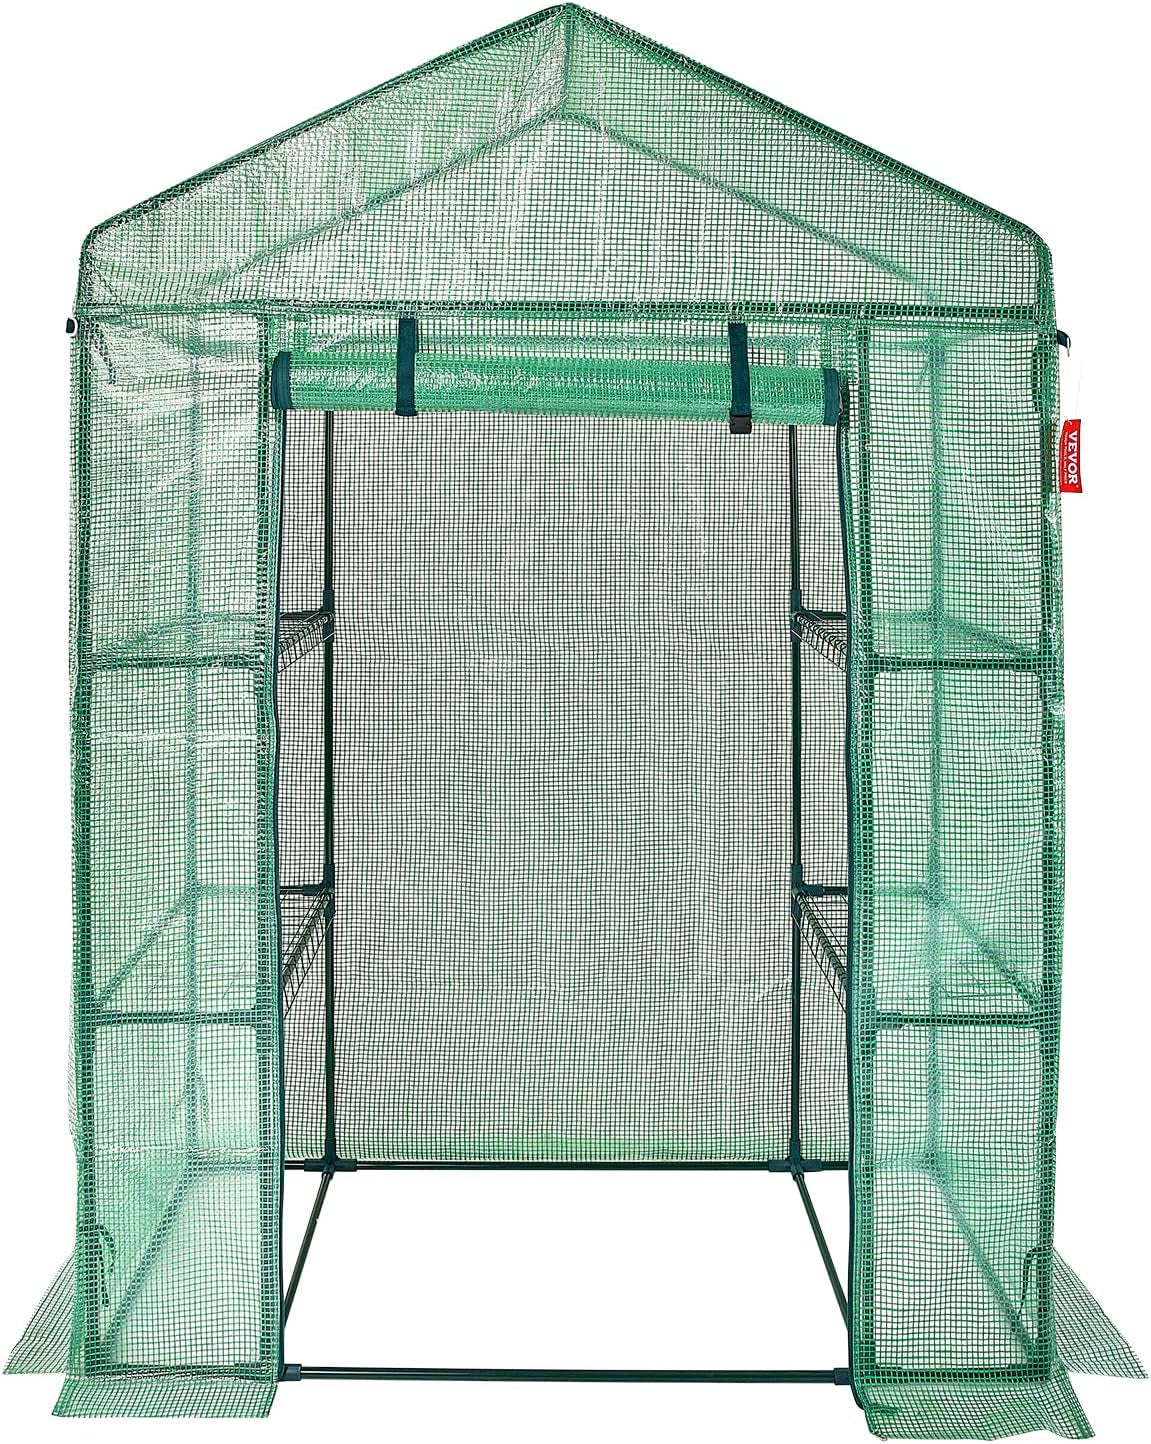 Walk-In Green House, 55.5 X 29.3 X 80.7 Inch, Portable Greenhouse with Shelves, High Strength PE Cover with Roll-Up Zipper Door and Steel Frame, Set up in Minutes, for Planting and Storage - Design By Technique